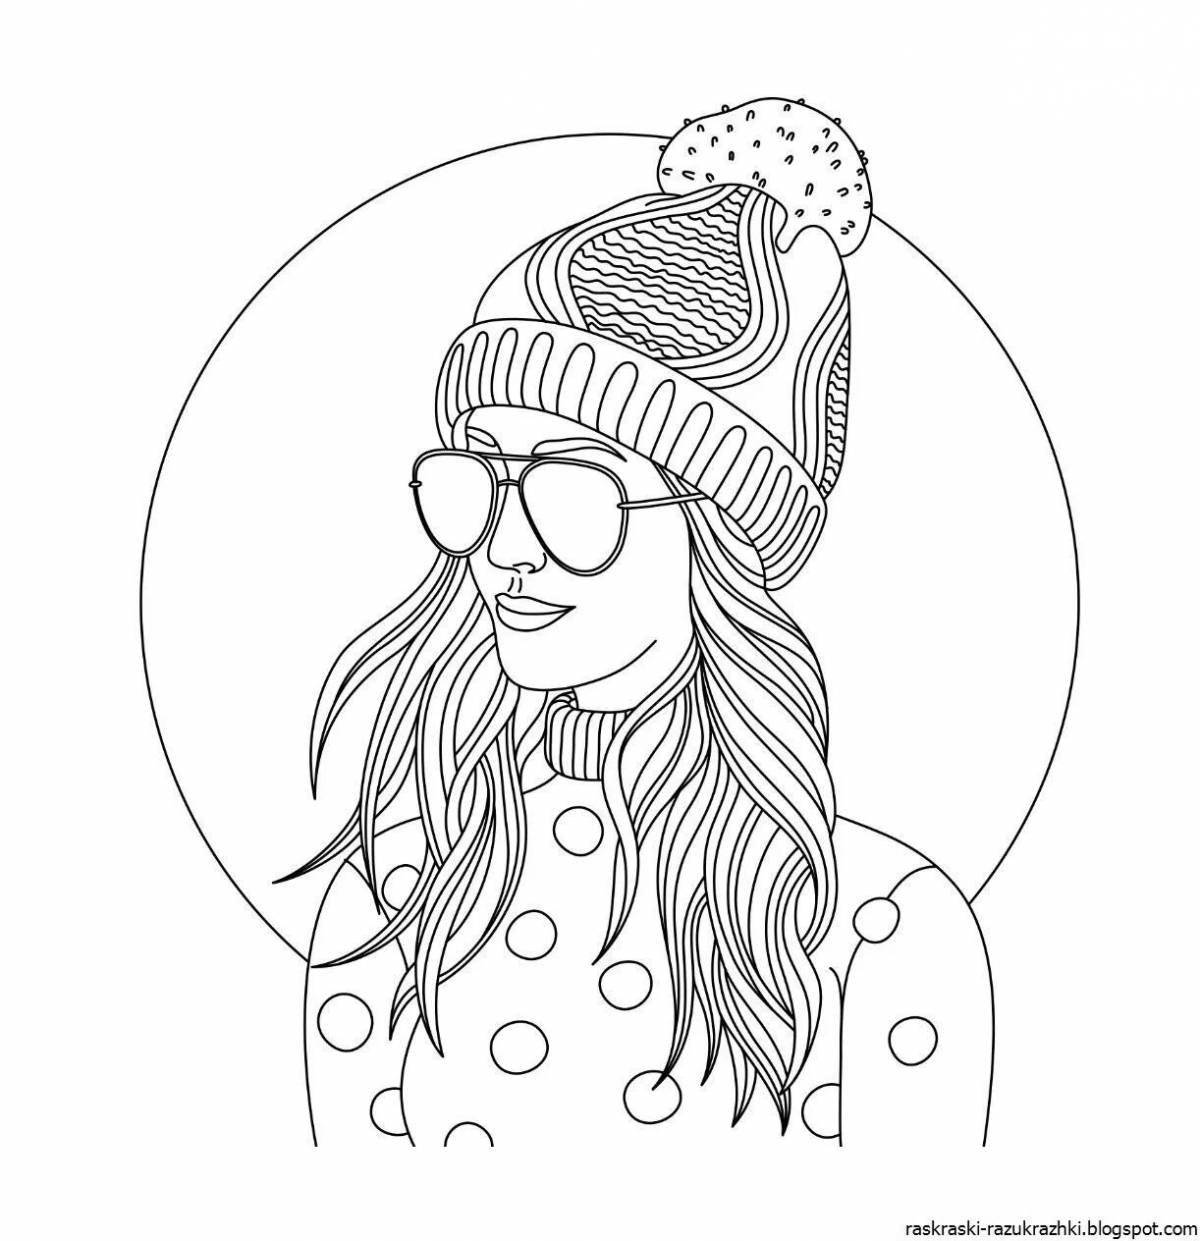 Innovative cool fashion coloring book